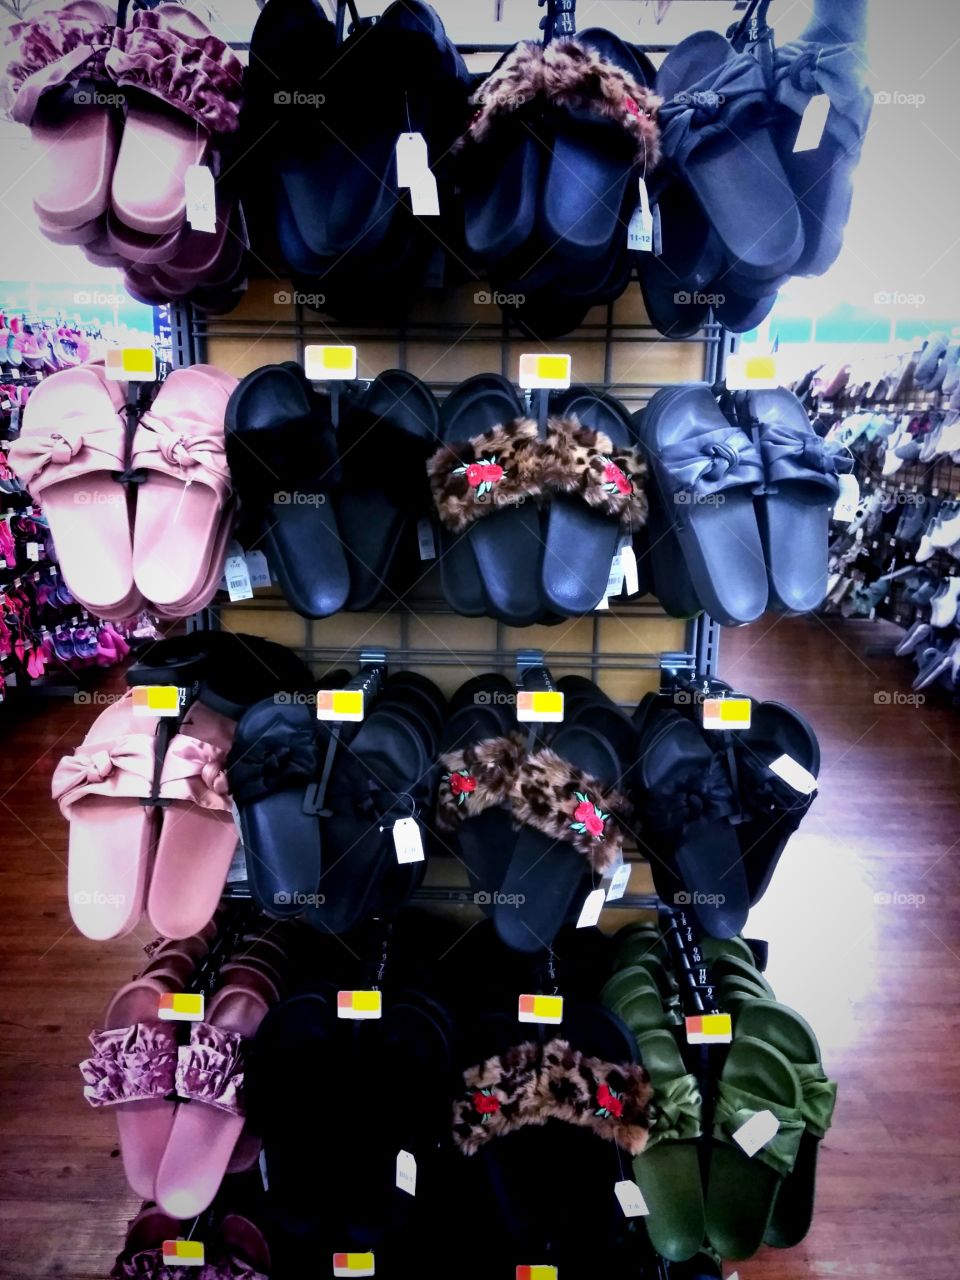 Sliding into Summer at Walmart with Trendy Slides in Faux Fur, Leopard Print and more 💛 Affordable Shoes under $10